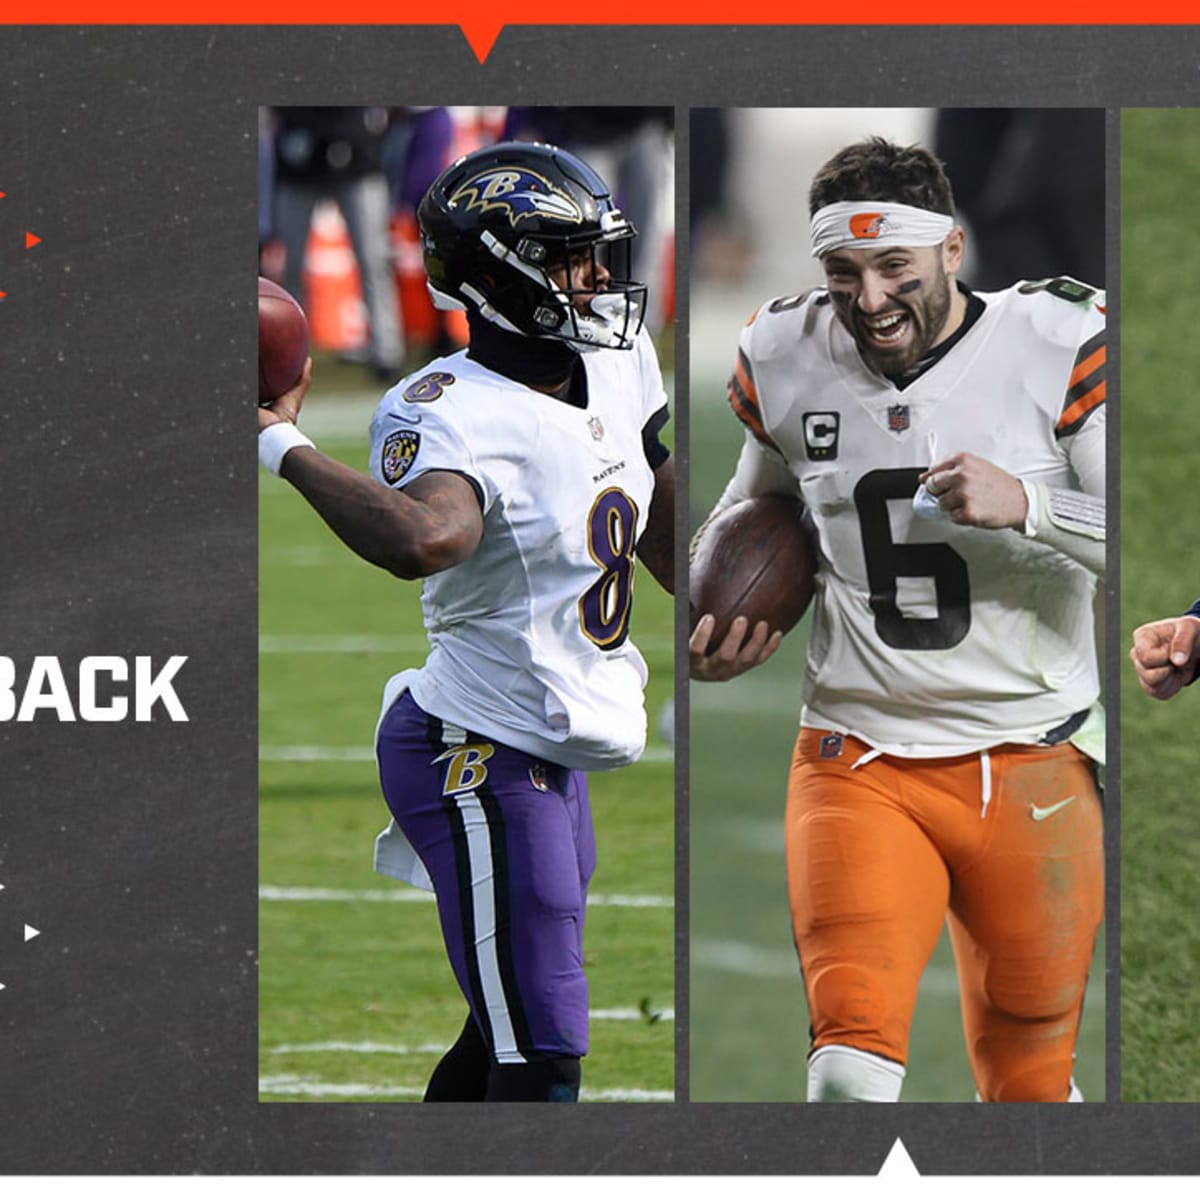 Lamar Jackson wins a playoff game; Browns overcome hectic week